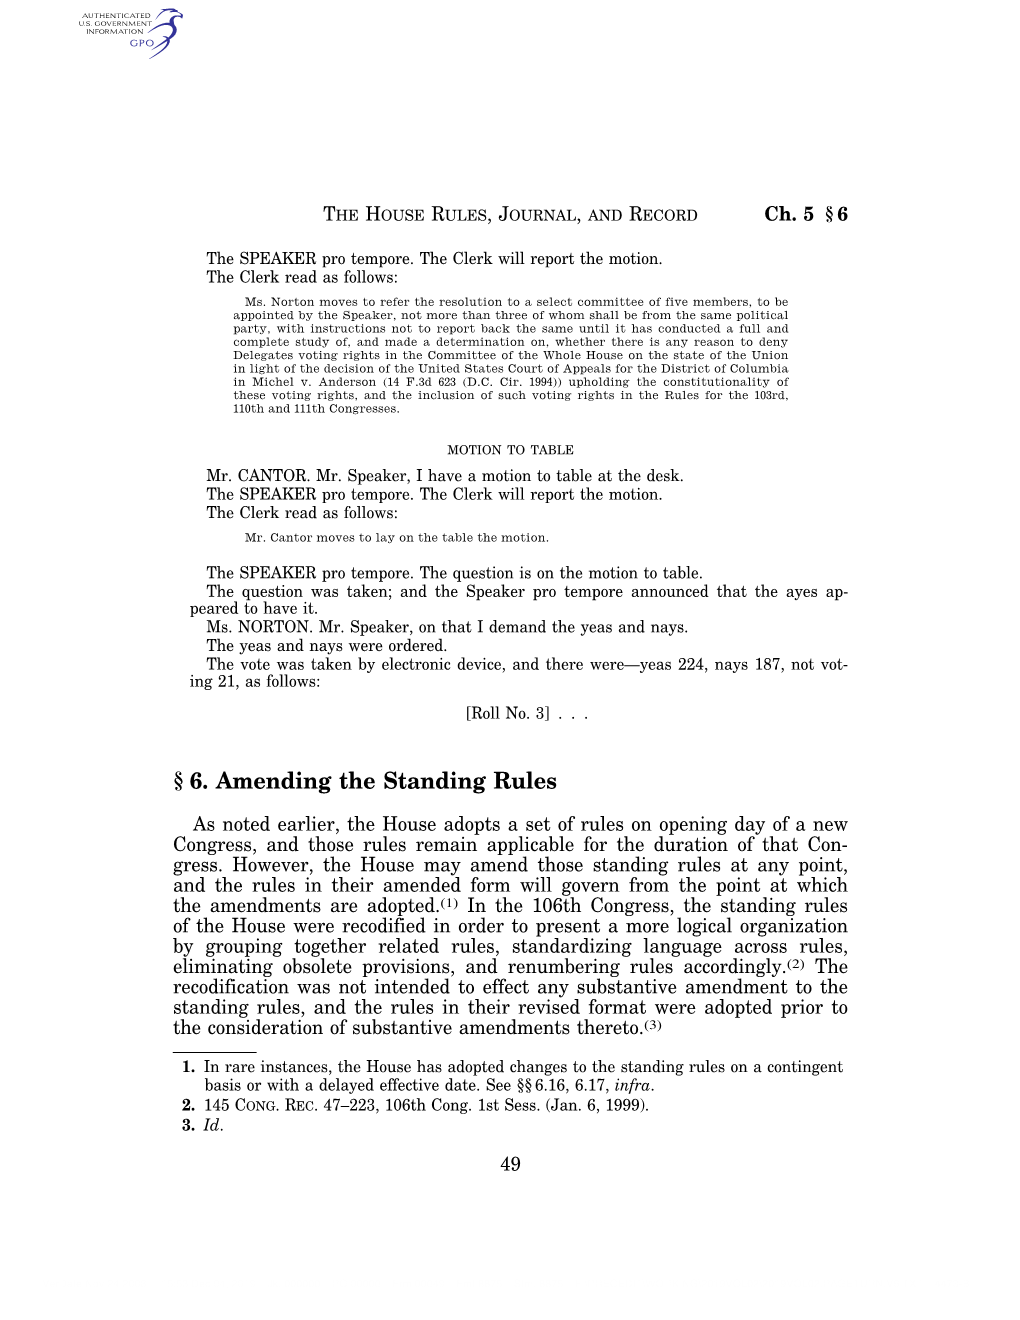 § 6. Amending the Standing Rules